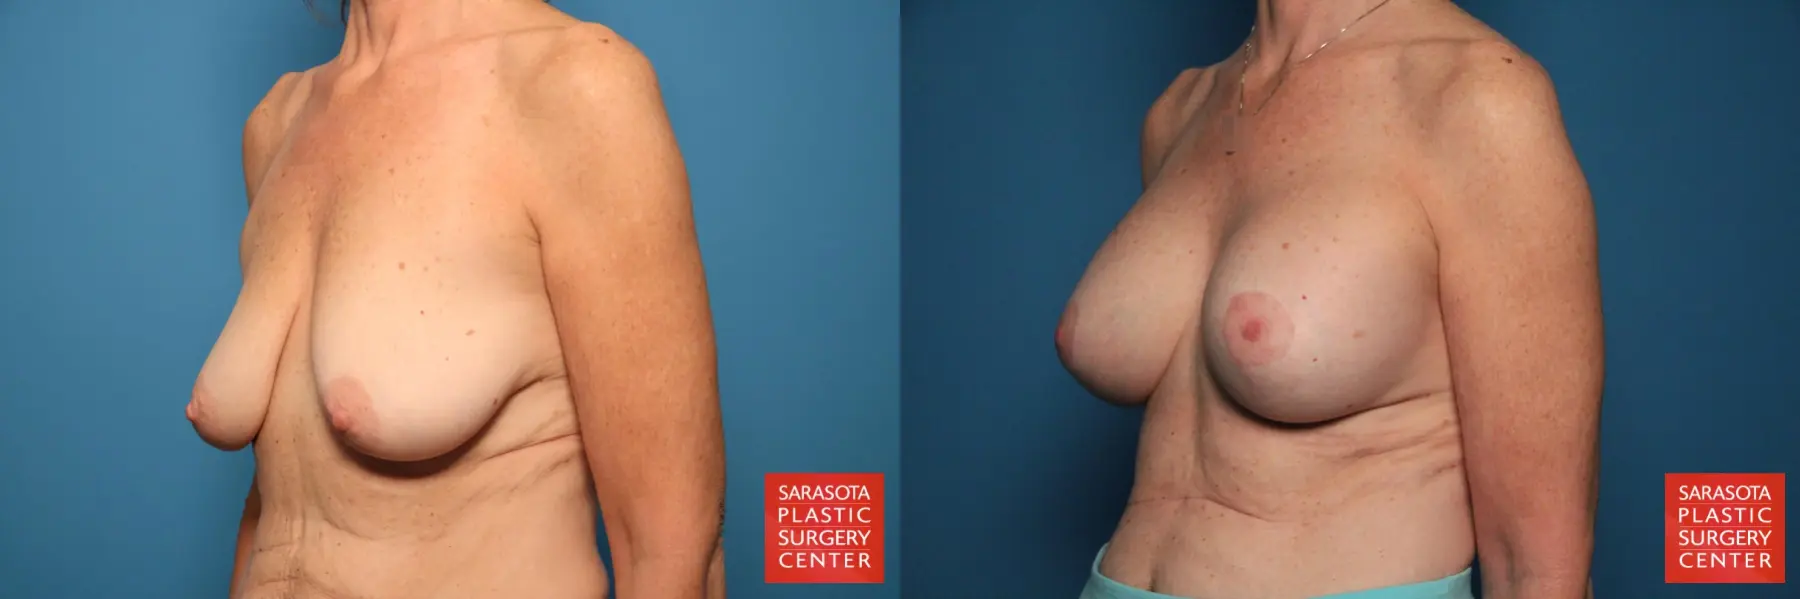 Breast Augmentation With Mesh : Patient 1 - Before and After 2